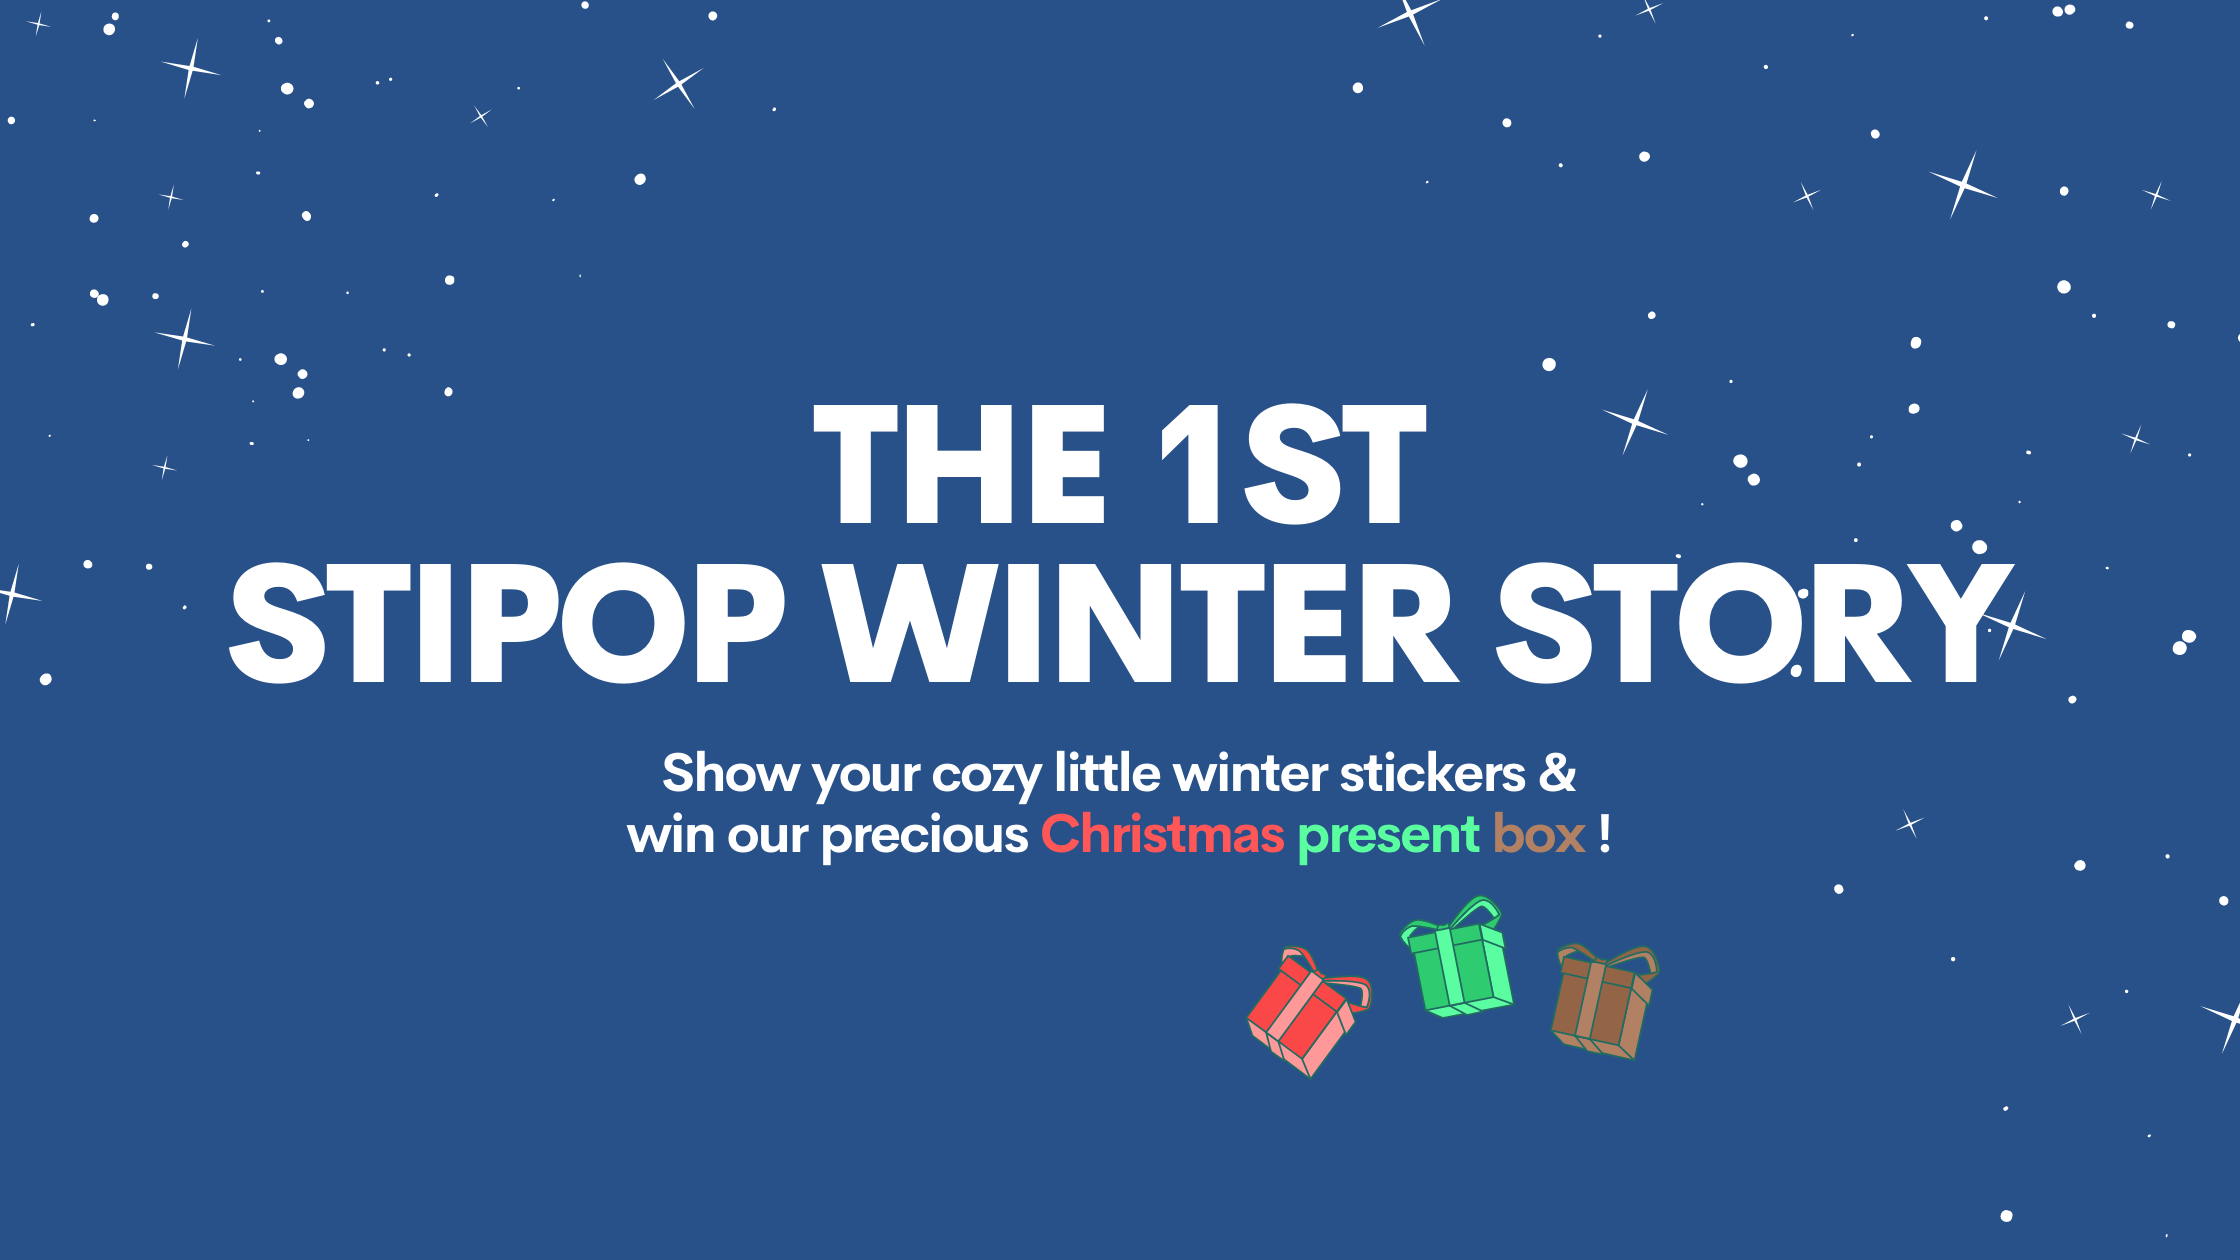 The 1st Stipop Winter Story. As we all can feel the chill in the air ...